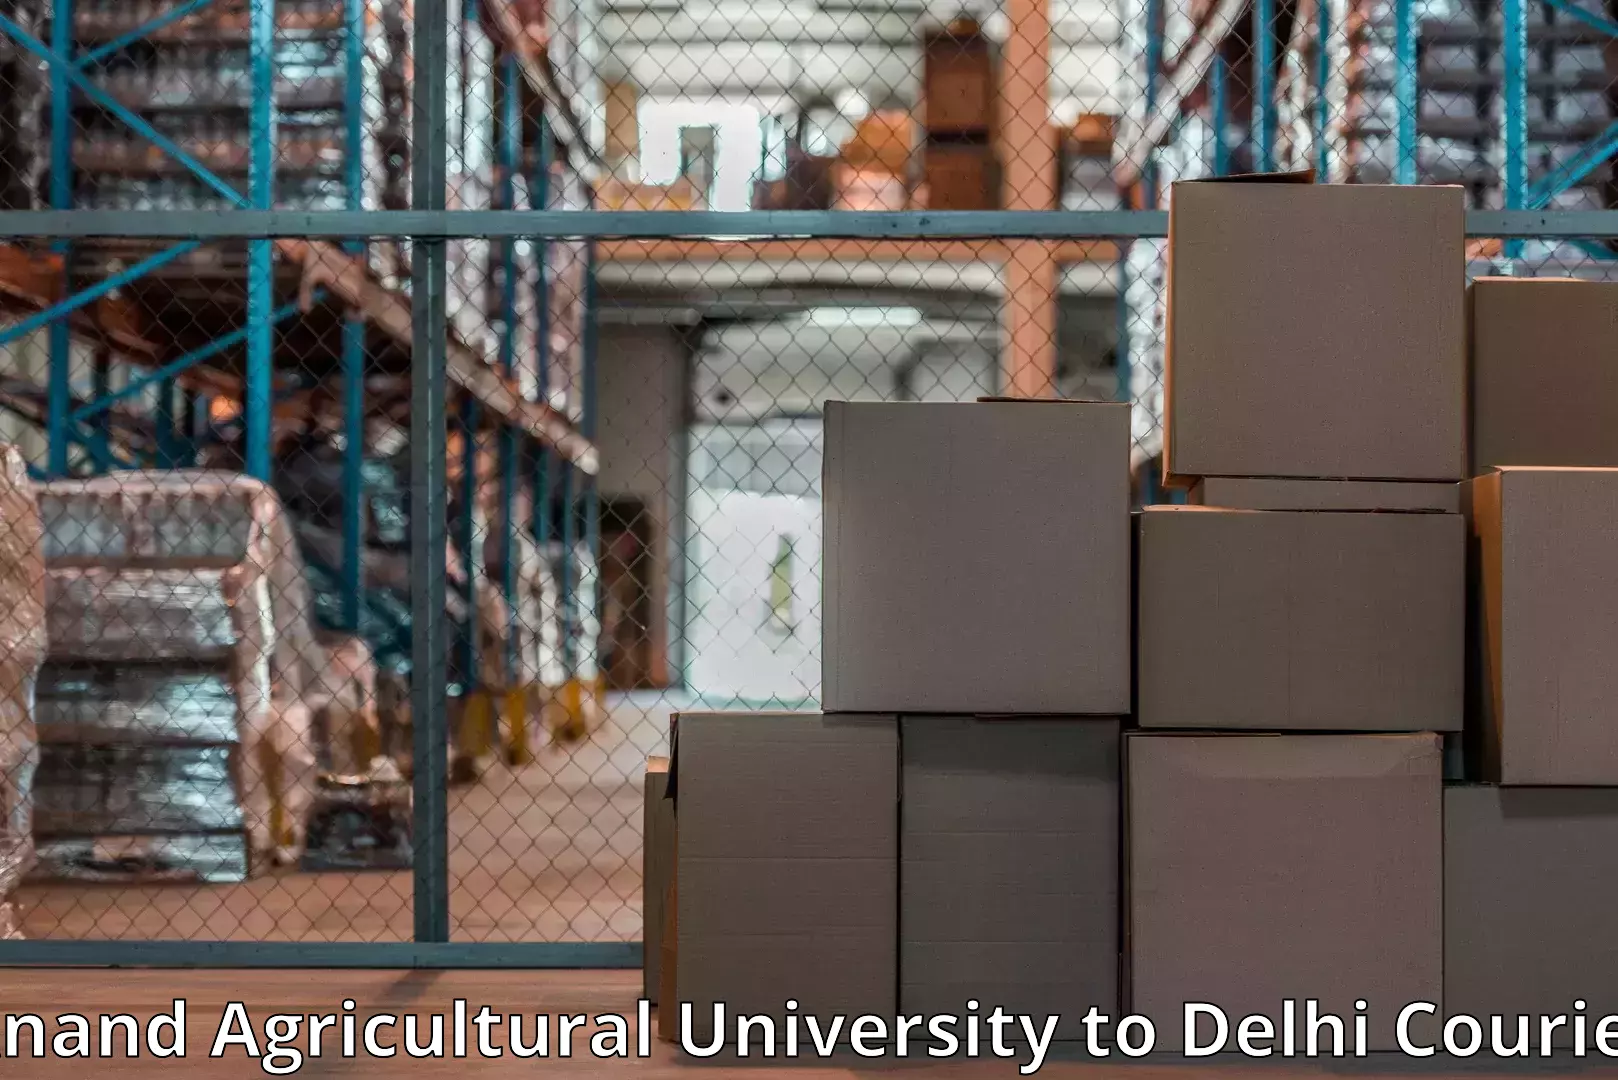 Professional moving company Anand Agricultural University to Delhi